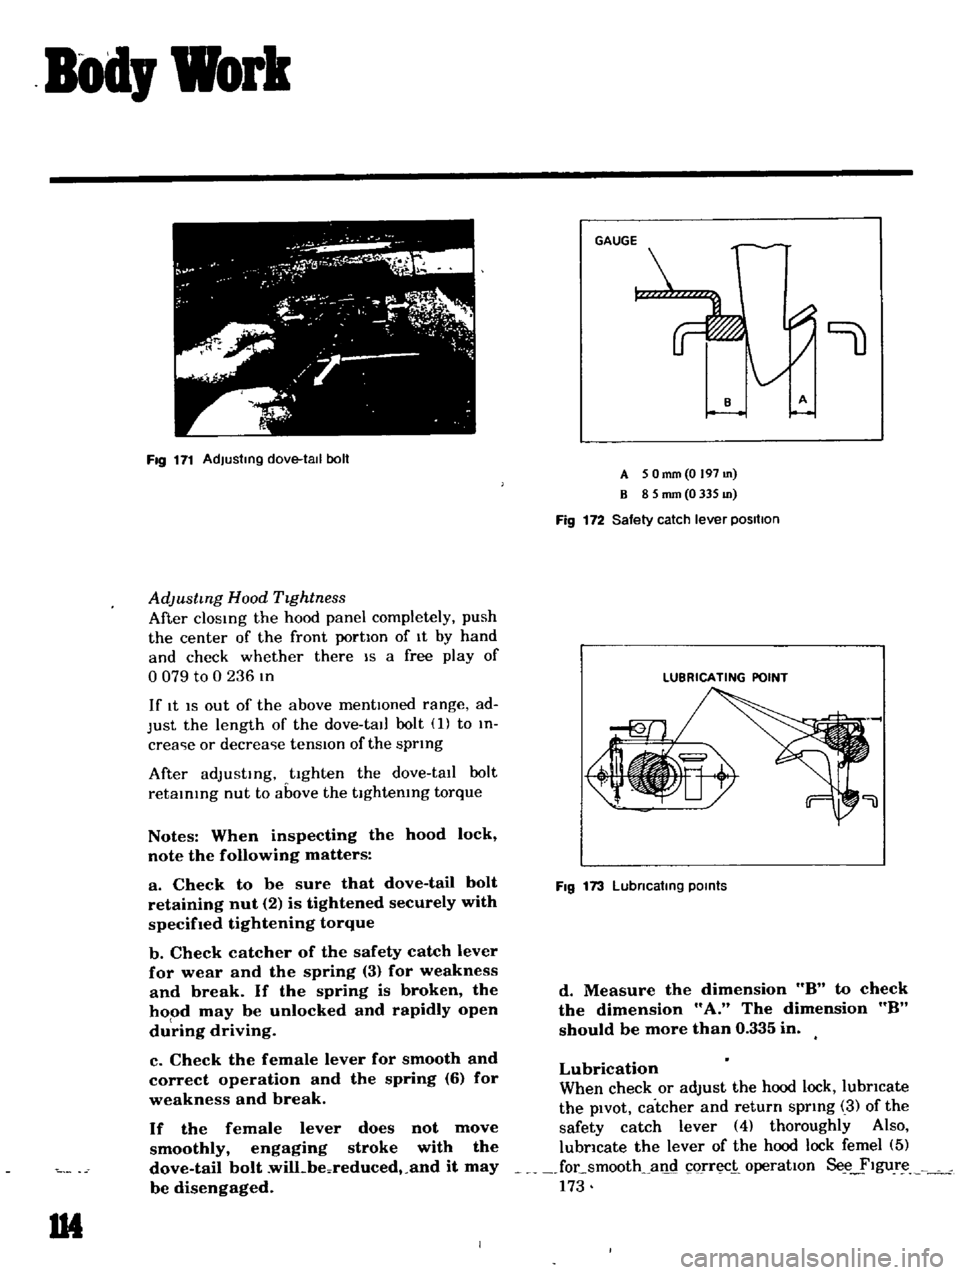 DATSUN B110 1969  Service Repair Manual 
Bod 
Work

J

G 
3

1

7 
iJ 
0
t

Fig 
171 
Adjusting 
dove 
tall 
boll

AdJustmg 
Hood

TIghtness

After

clOSIng 
the 
hood

panel 
completely 
push

the 
center

of 
the 
front

portIon 
of 
It

